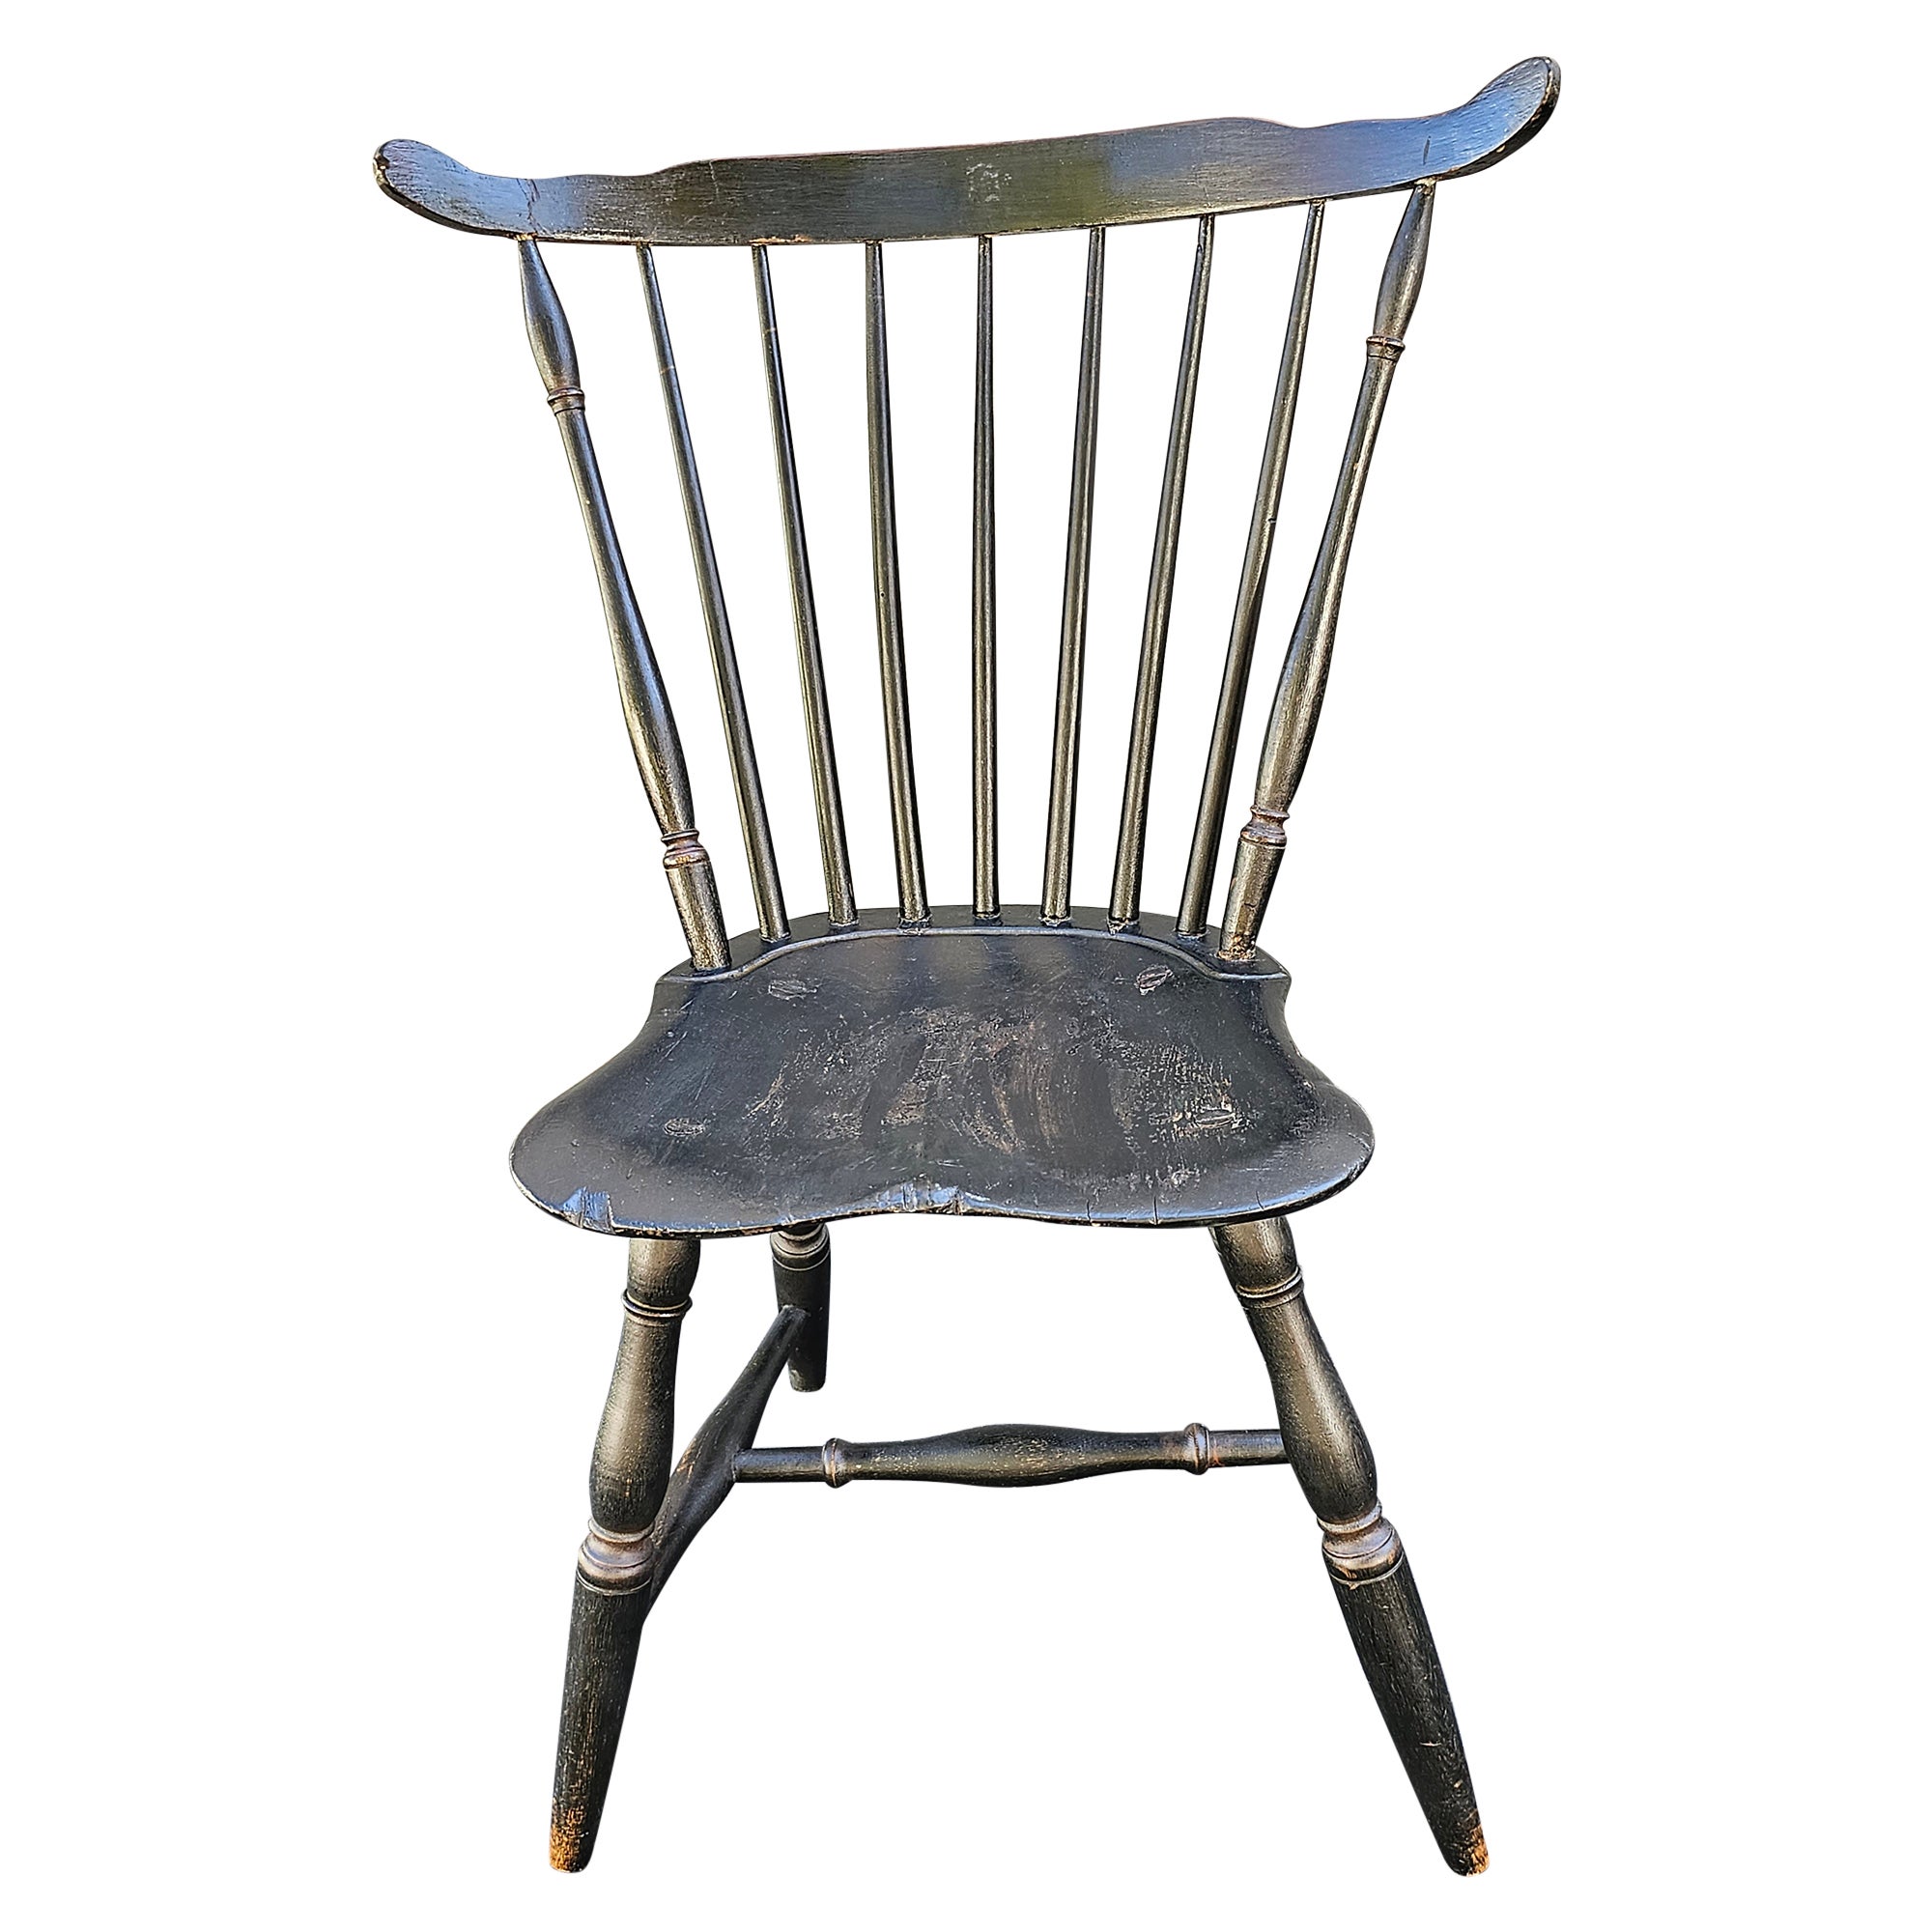 19th Century Early American Ebonized  Saddle Seat and Spindle Back Chair